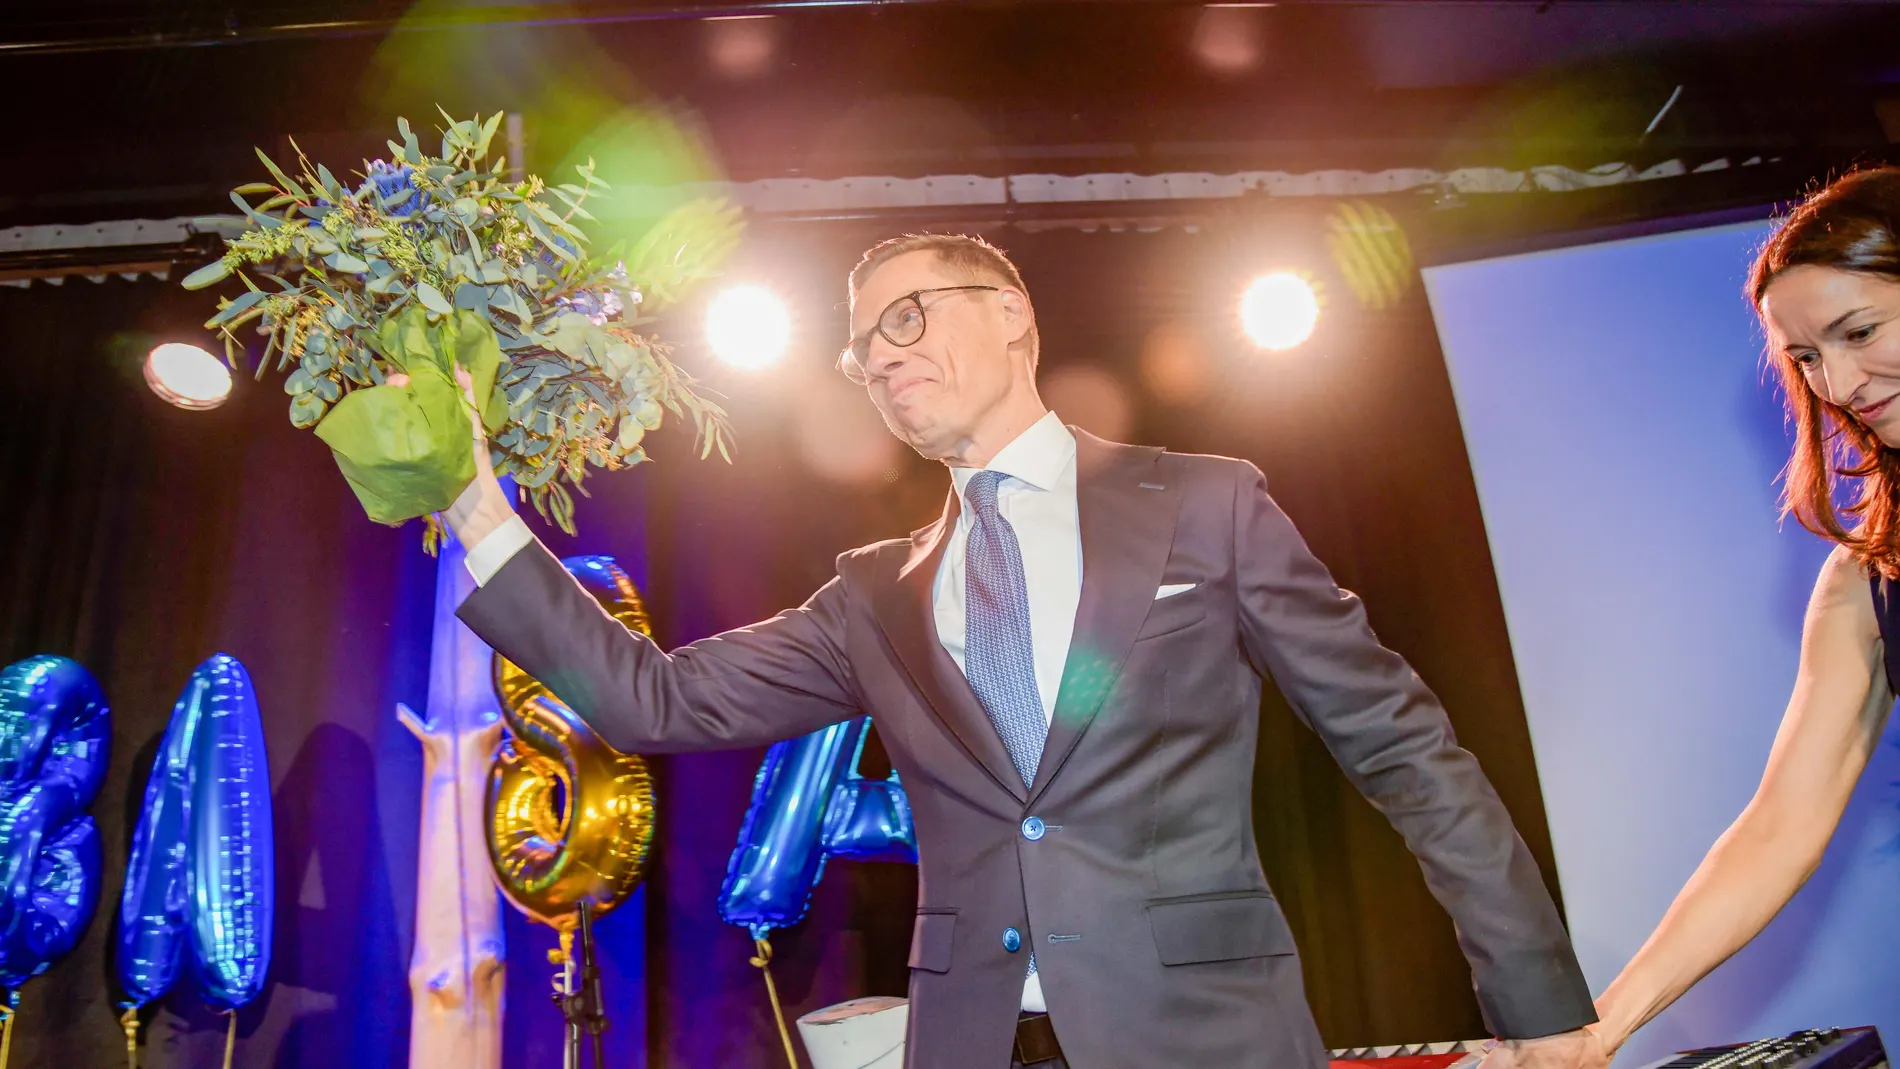 Helsinki (Finland), 11/02/2024.- Finland's Presidential candidate Alexander Stubb celebrates after winning the second round of the presidential election, in the Little Finlandia event center in Helsinki, Finland, 11 February 2024. Presidential candidate Alexander Stubb is set to become Finland's next president for a term starting on 01 March, afer winning the run-off vote against independent candidate Pekka Haavisto. (Finlandia) EFE/EPA/JARNO KUUSINEN